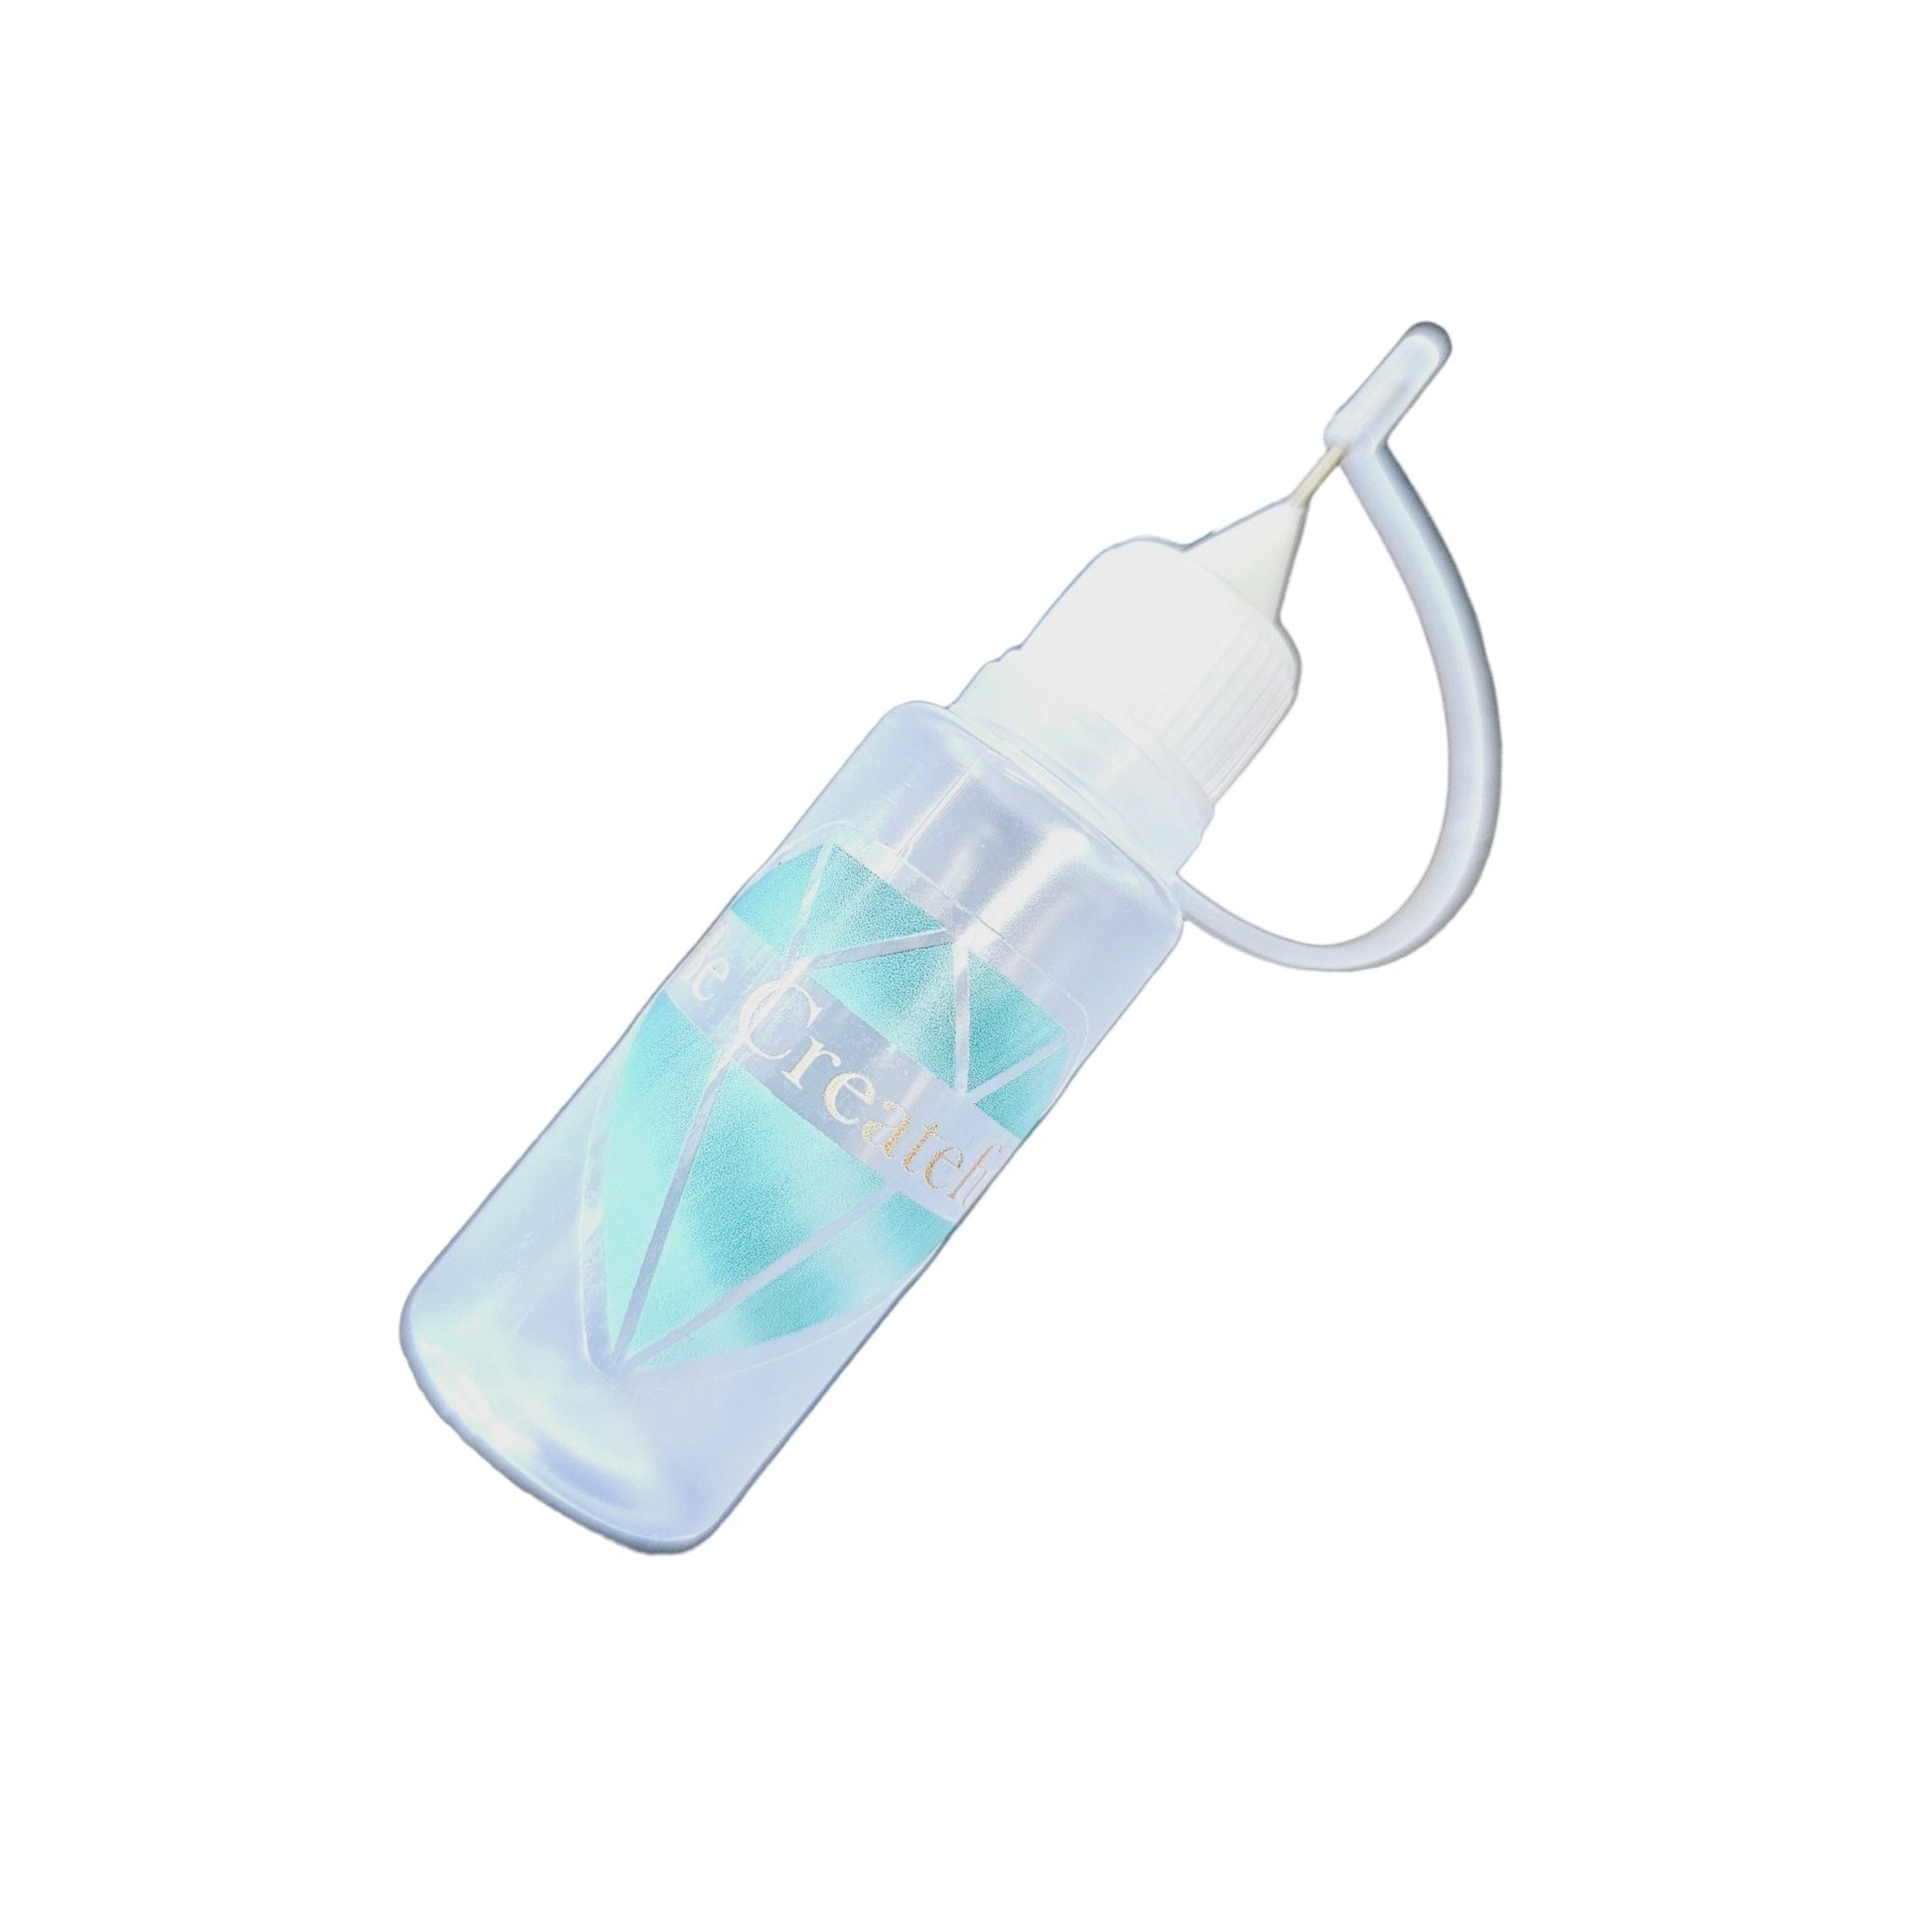 Glue Applicator with Metal tip 15ml Squeezable Bottles with Childproof Cap